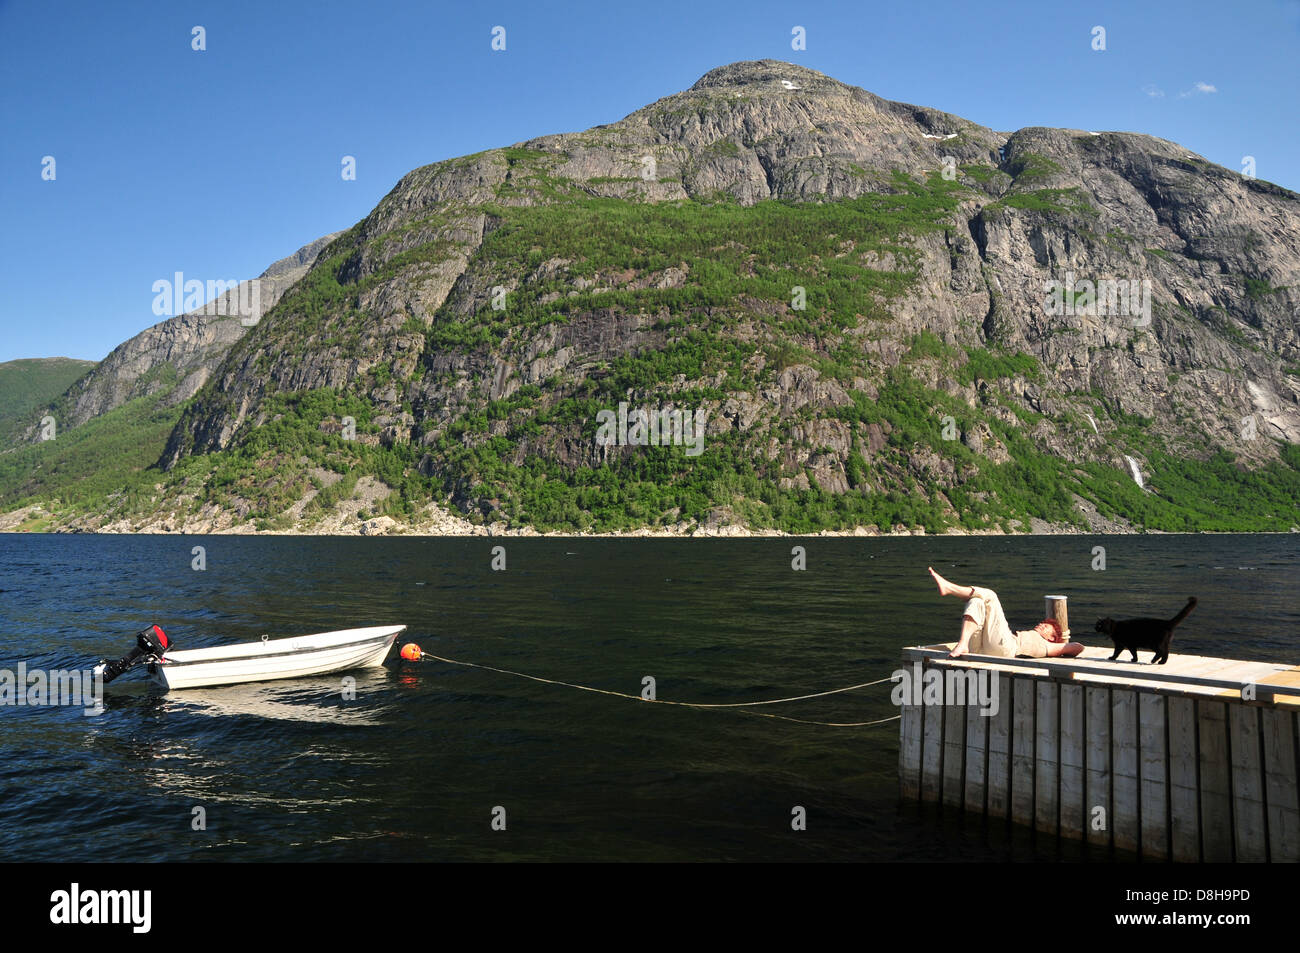 Holiday in Norway Stock Photo